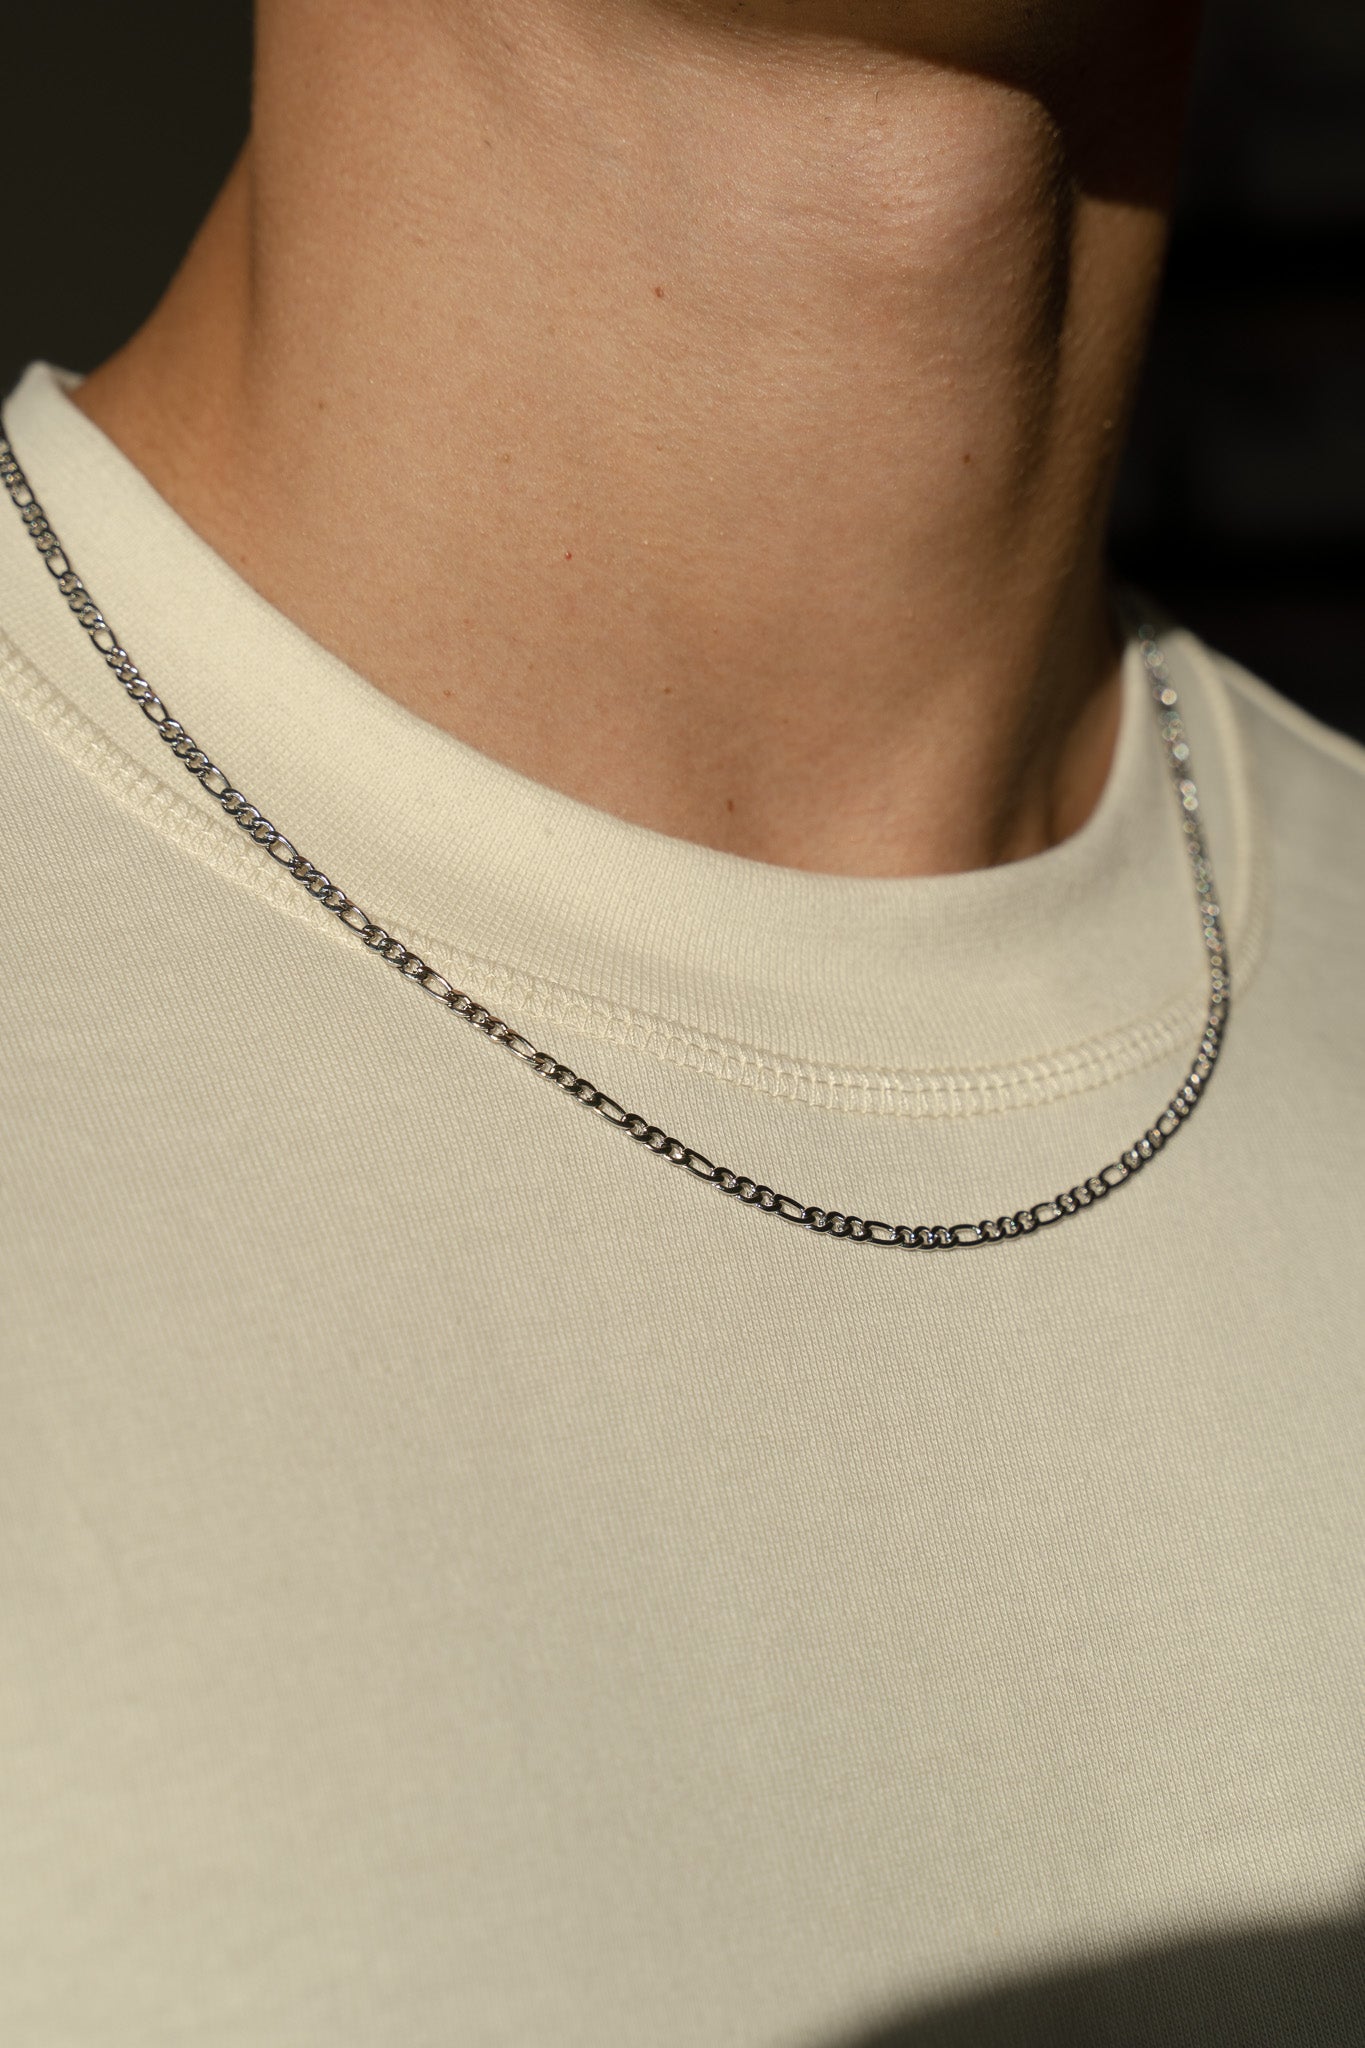 Alexander Necklace in White Gold - 3mm